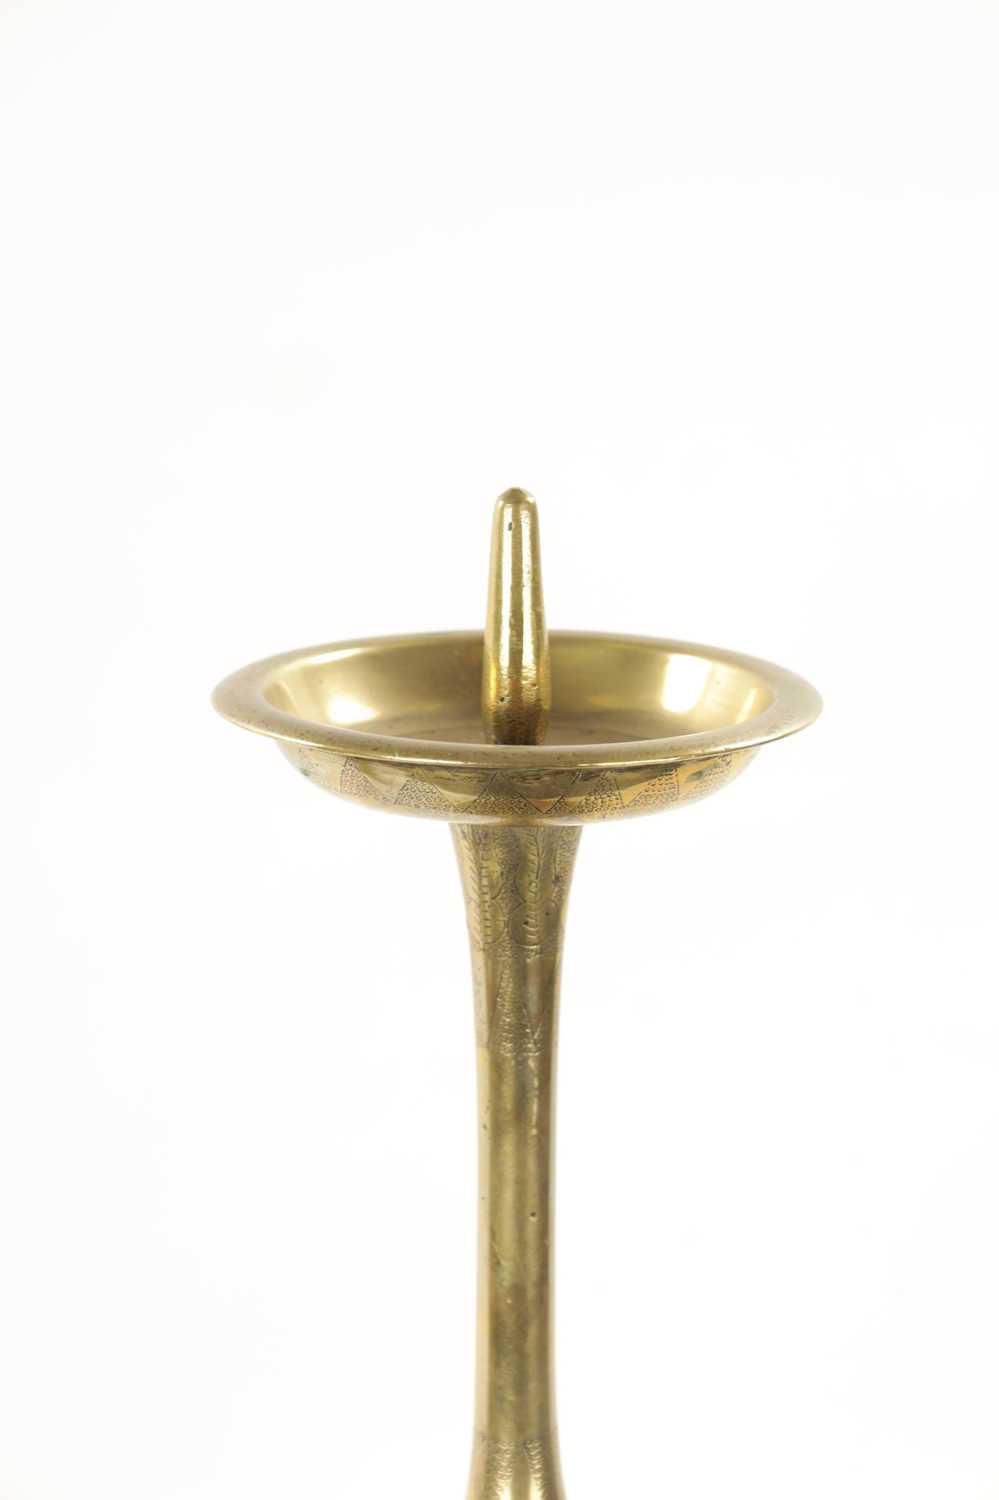 A 19TH CENTURY EASTERN BRASS CANDLESTICK - Image 3 of 10